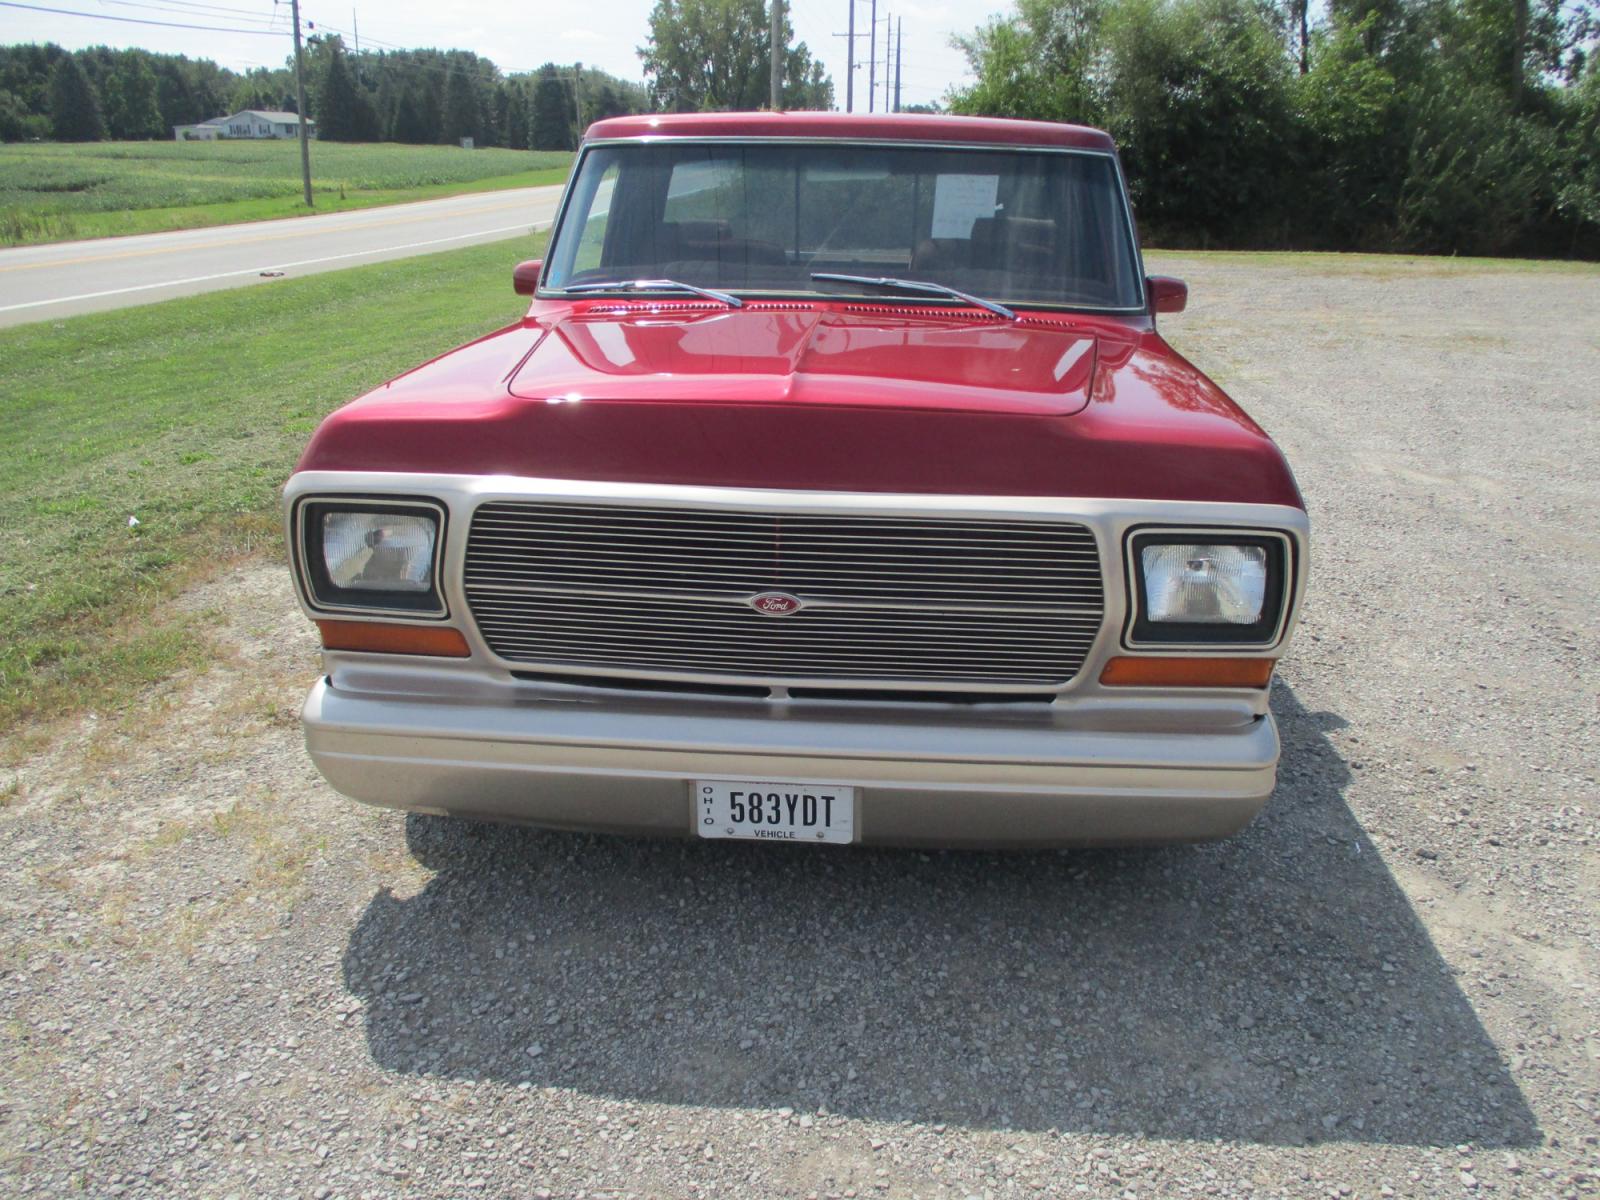 1977 /Burgundy Ford with an 351 engine, Automatic transmission, 0.000000, 0.000000 - 1977 Ford Engine: 351 Transmission: C-6 Trans. Rear End: Narrowed Ford Rear w/Tubbed Bed Interior: Hand Built Custom Interior w/Digital Dash Highlights: Ground effects, Fender Vents, Billet Grille, “92 Ford Bumper. Etched Glass, Digital Dash., Tilt Wheel, Center Cut Hood. Polished Stainless - Photo #4